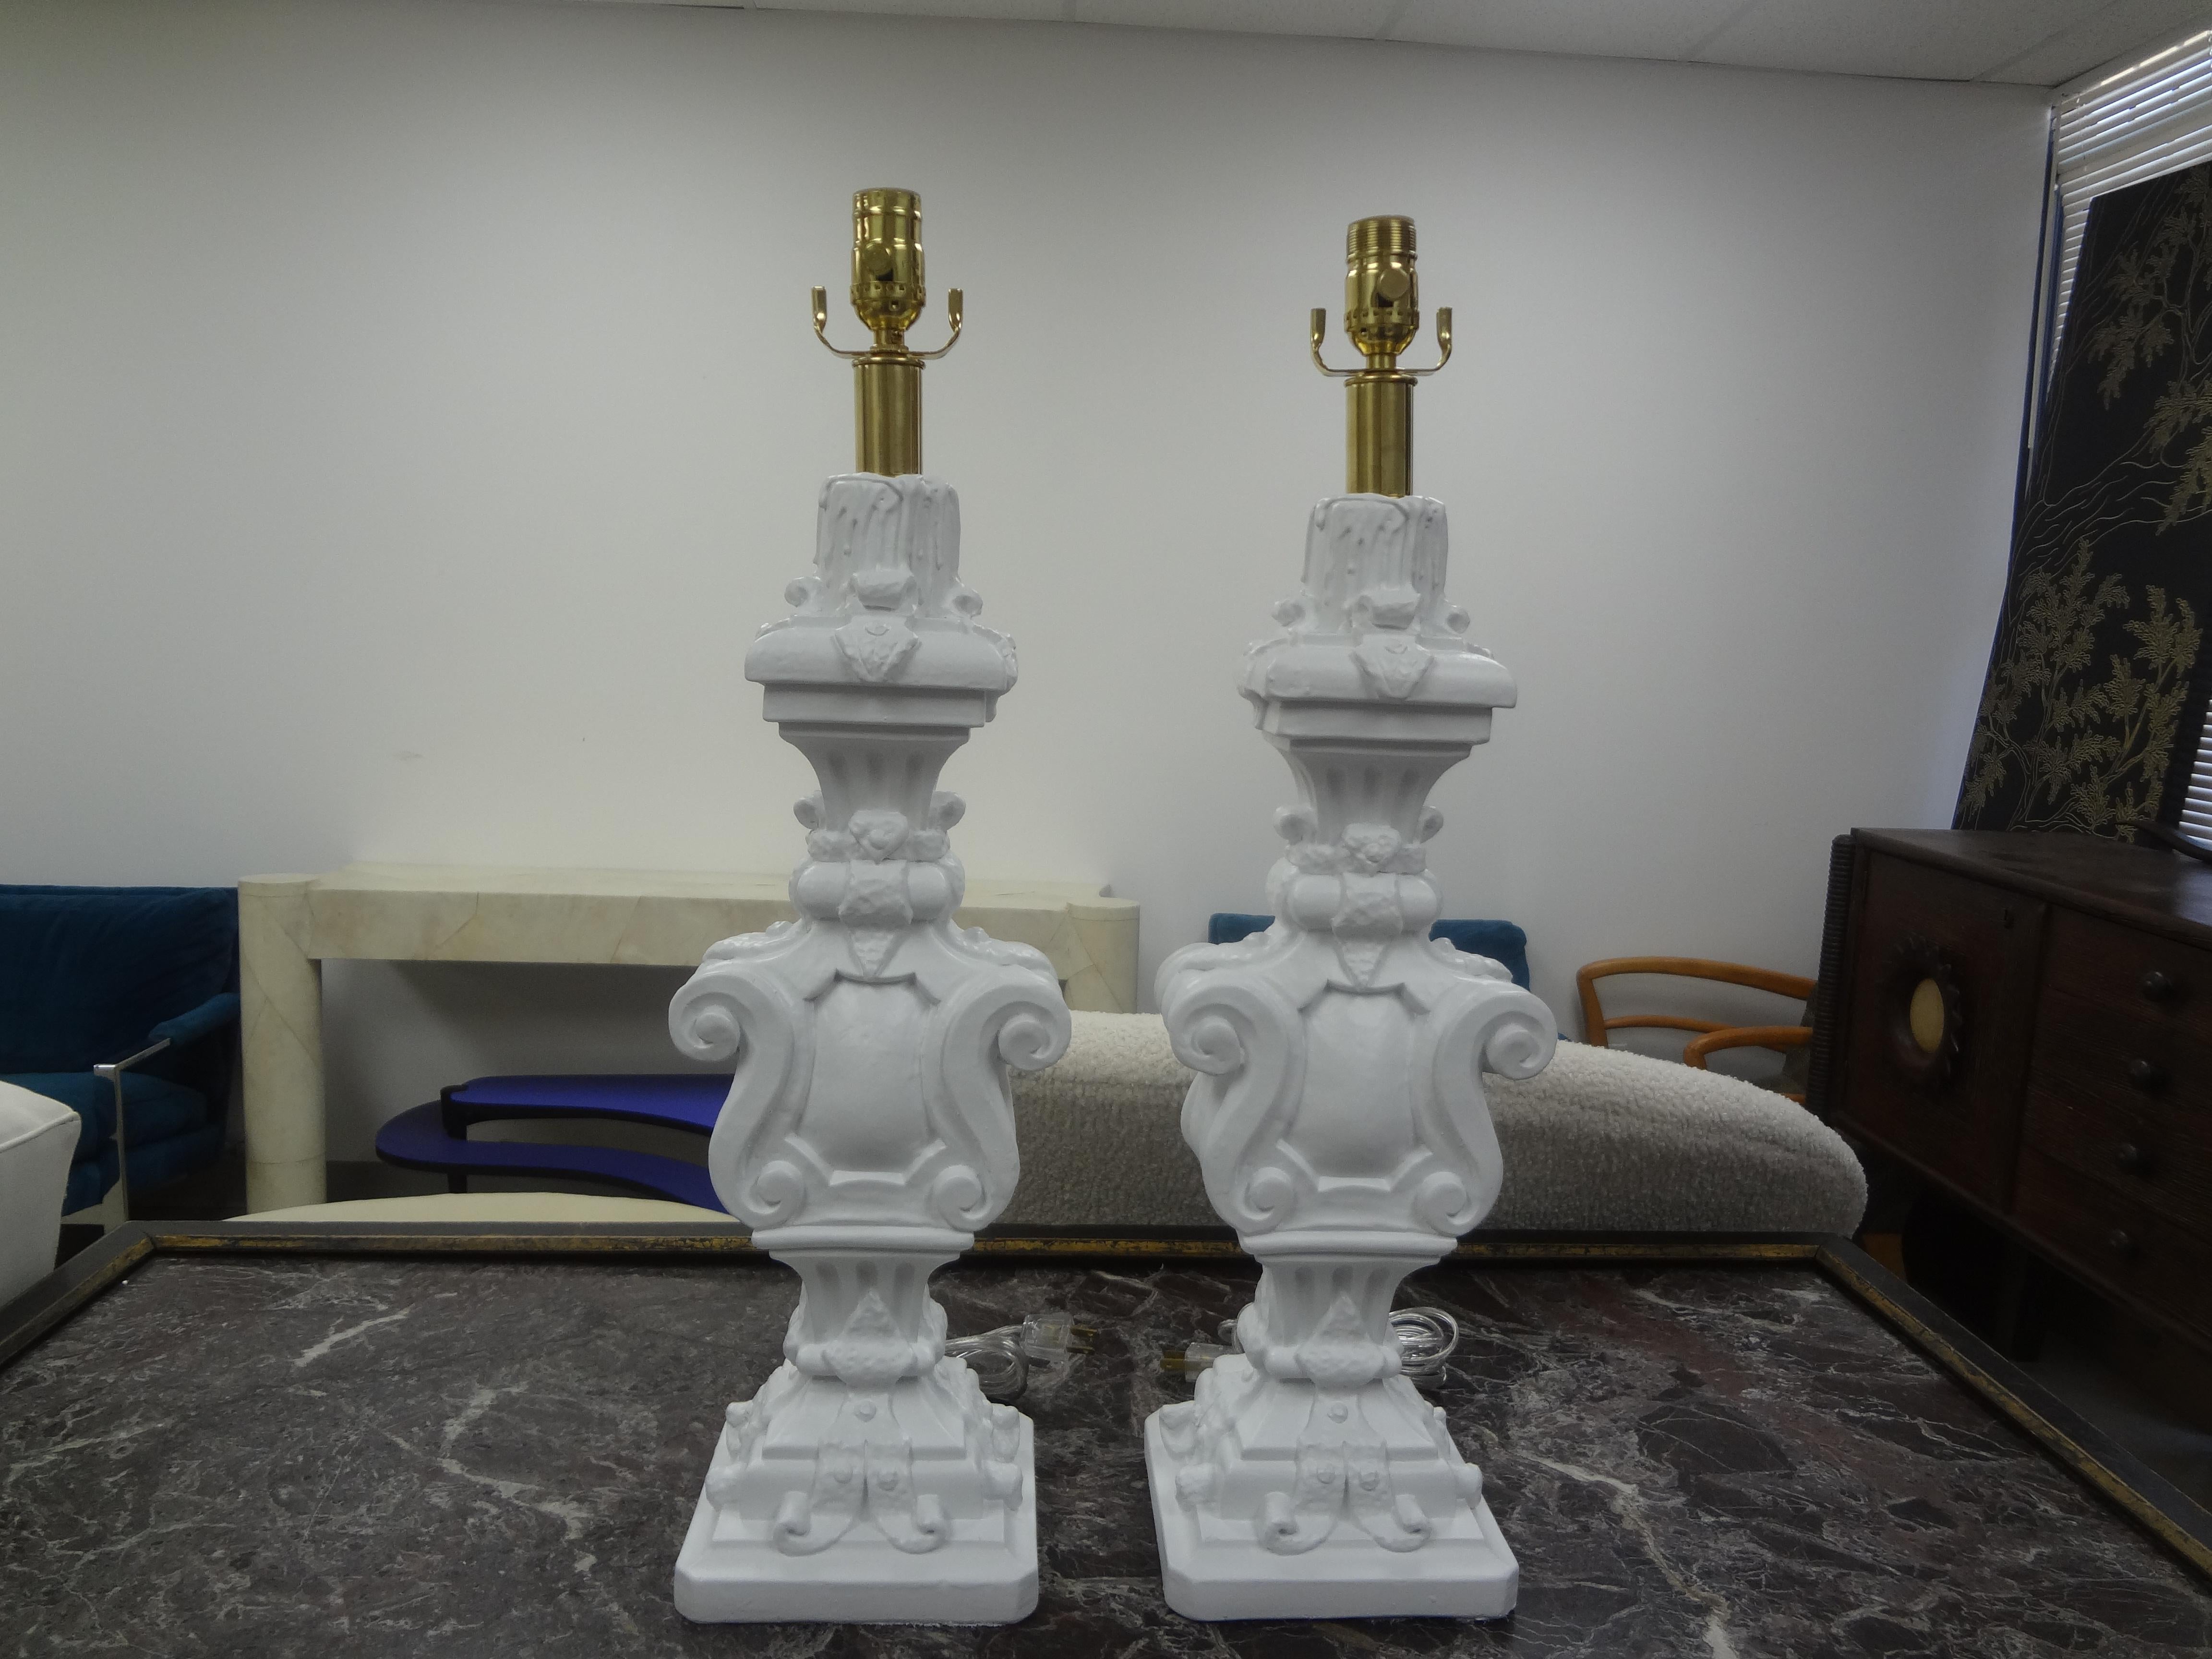 Pair Of Hollywood Regency Plaster Lamps.
This great pair of Dorothy Draper style plaster lamps are in very good condition, newly wired with new sockets and ready for your choice of shades.